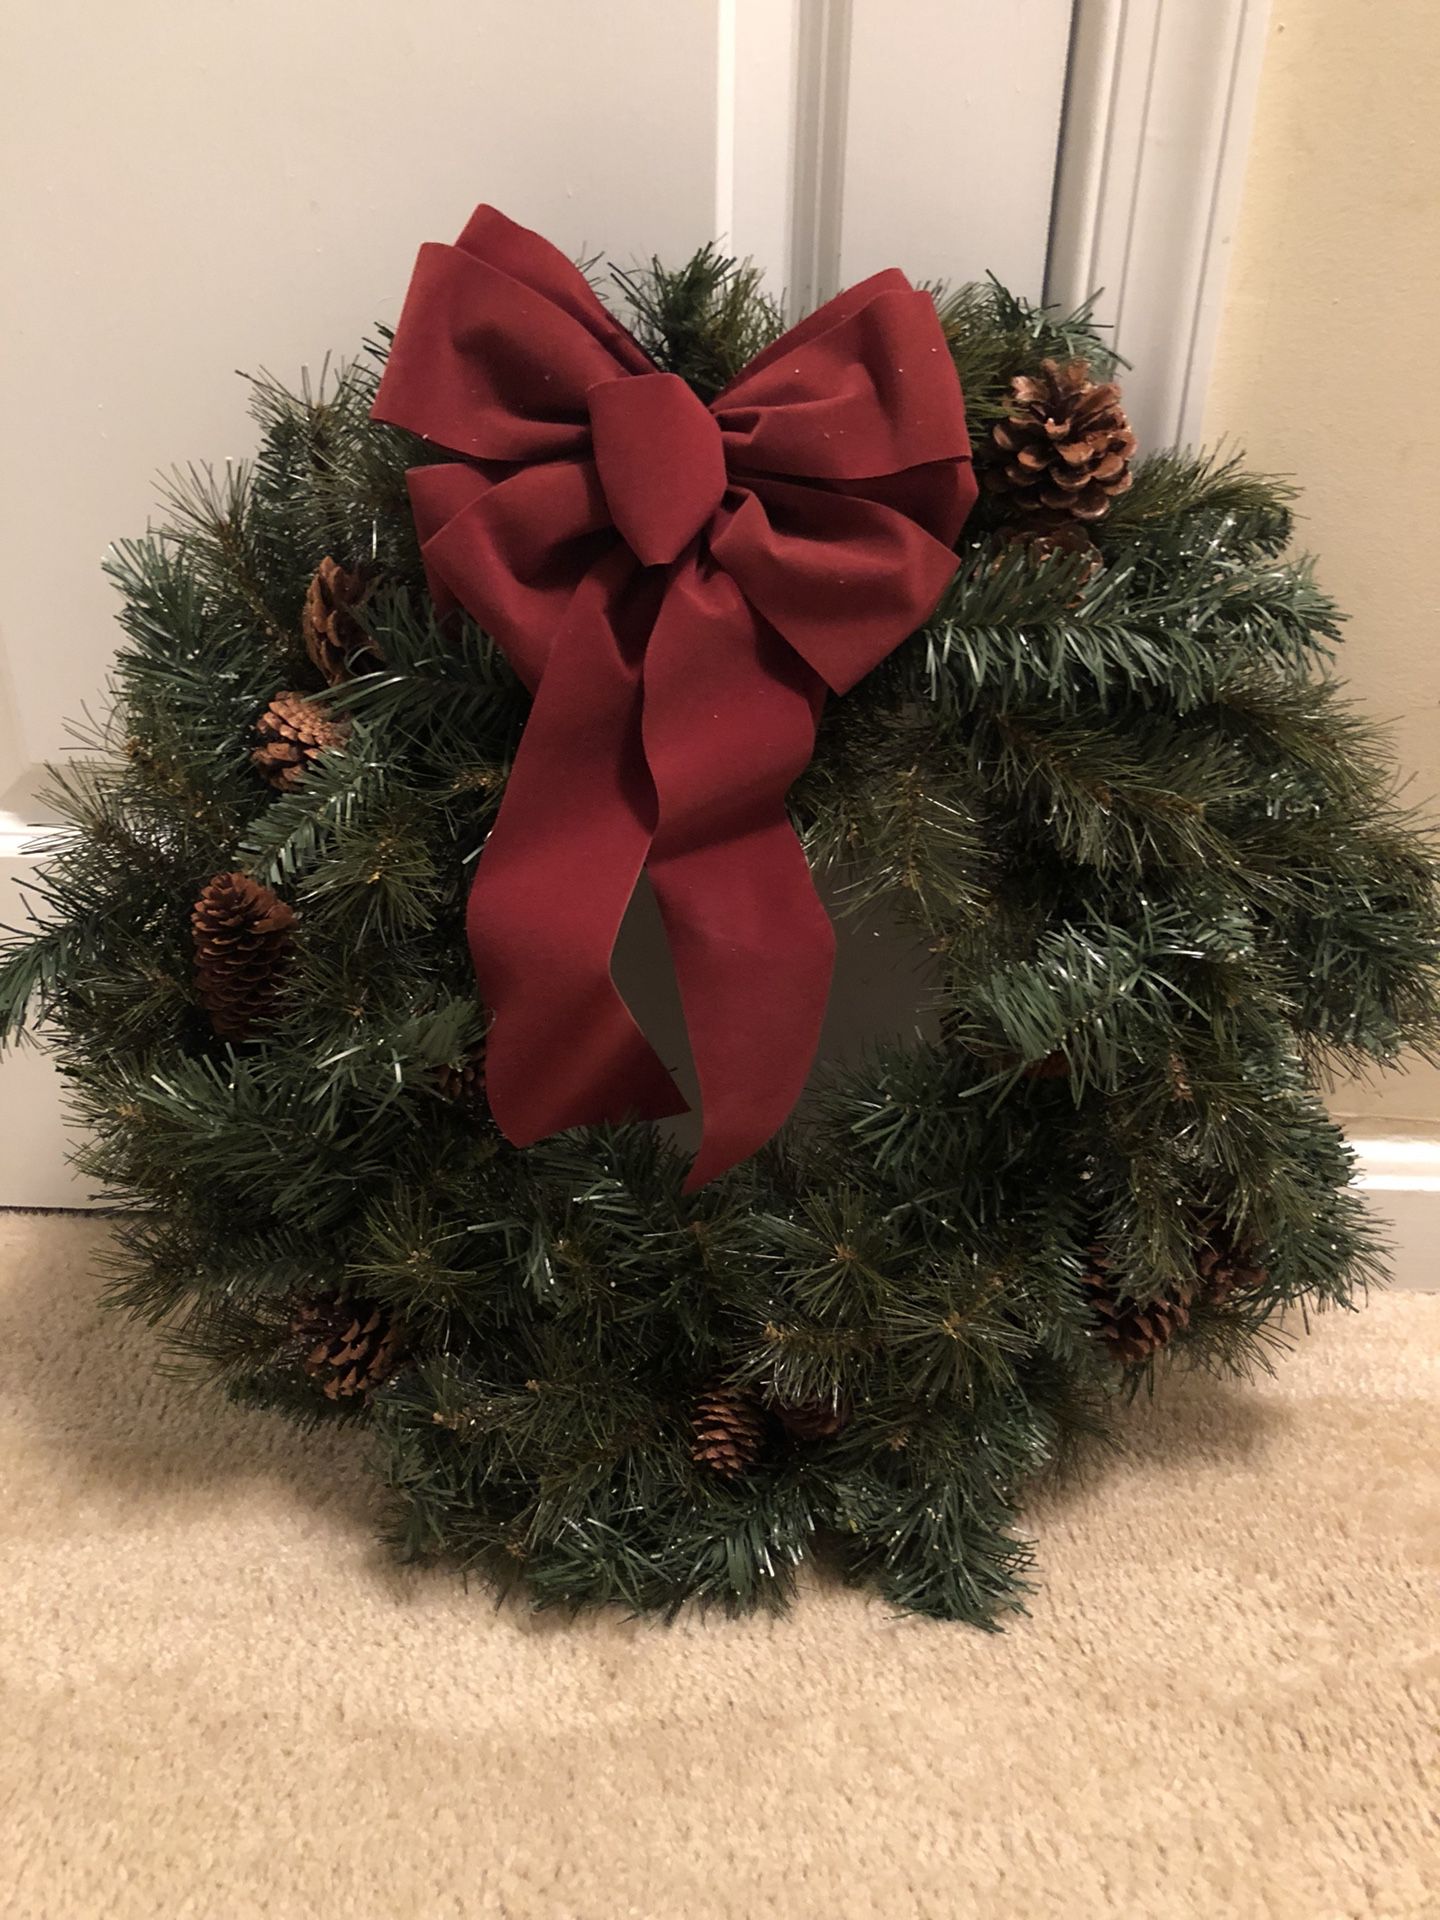 Wreaths and Hangers